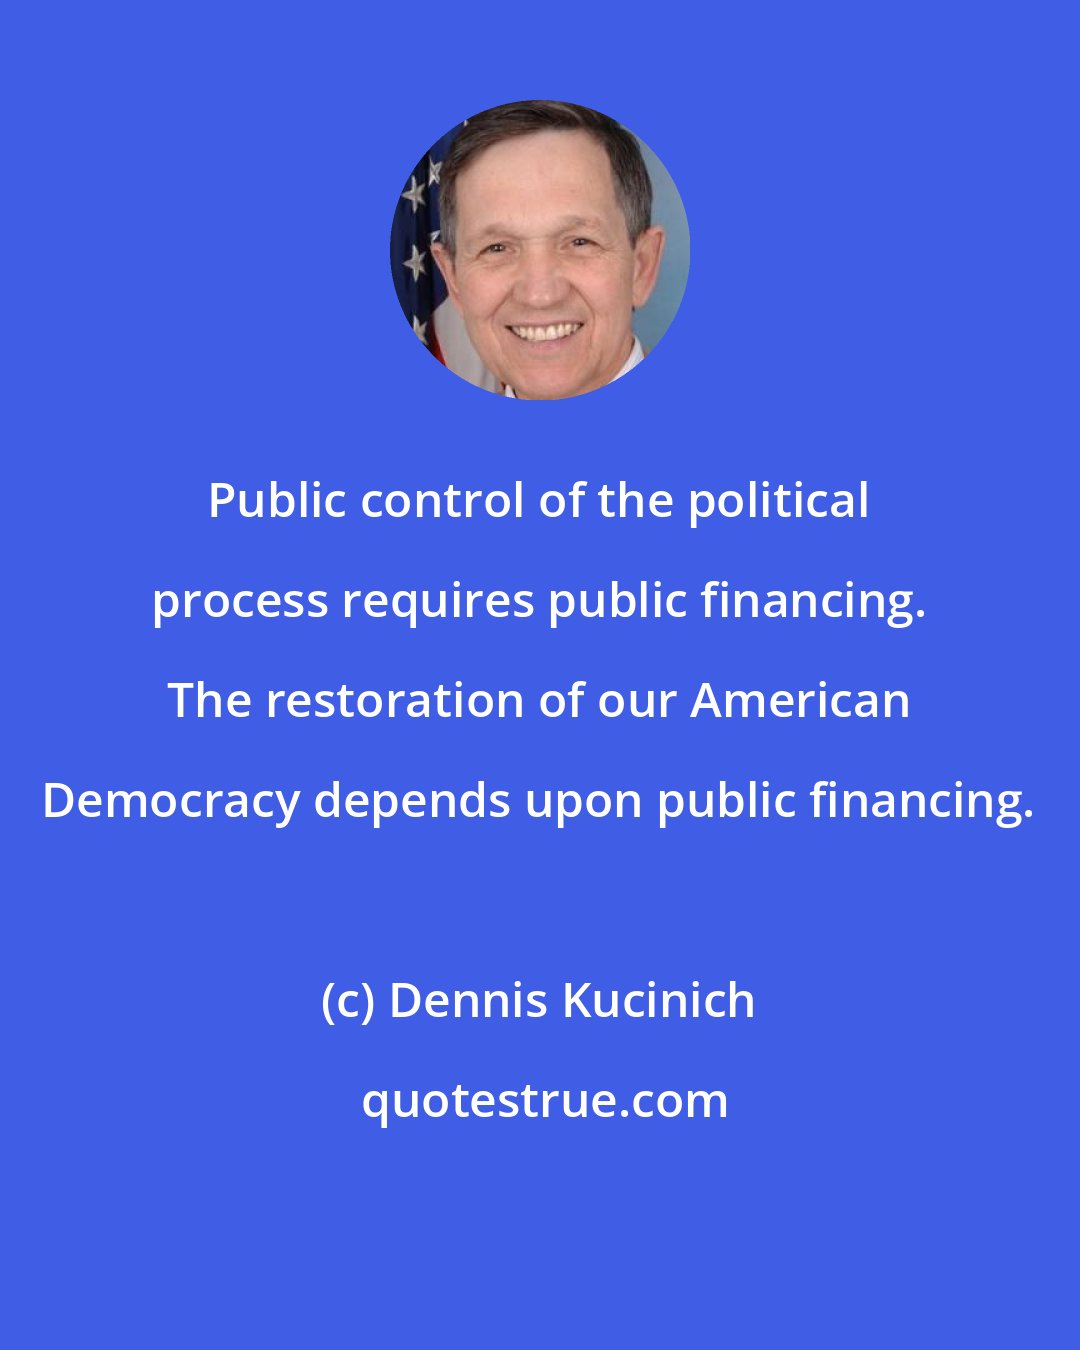 Dennis Kucinich: Public control of the political process requires public financing. The restoration of our American Democracy depends upon public financing.